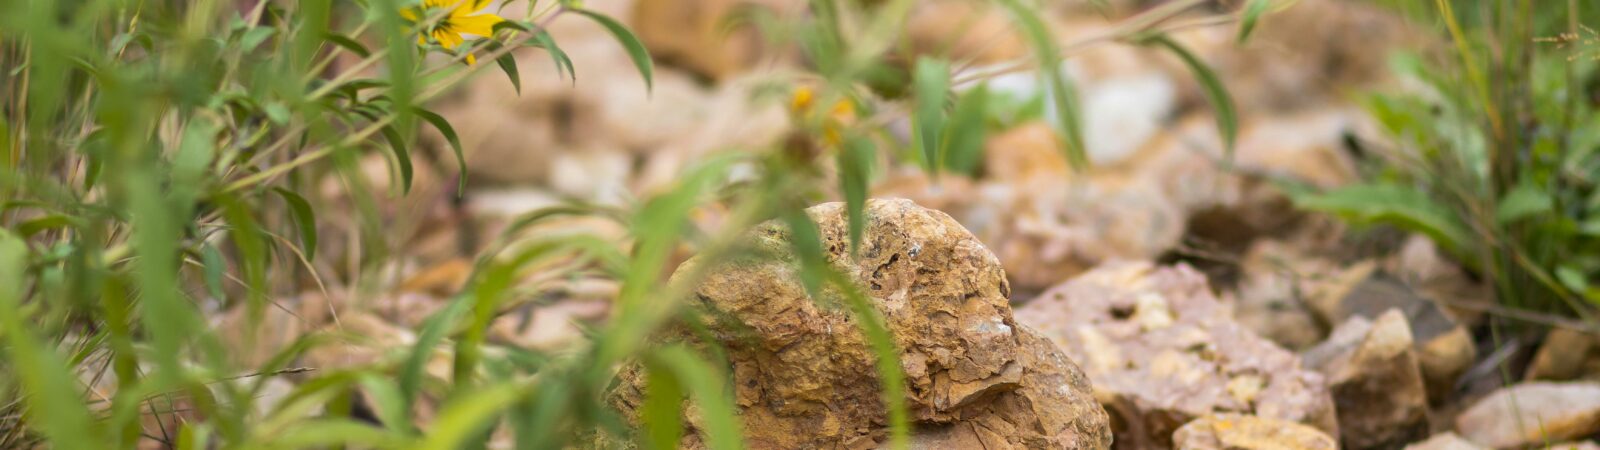 Close up of rocks and yellow native flowers in a rain garden